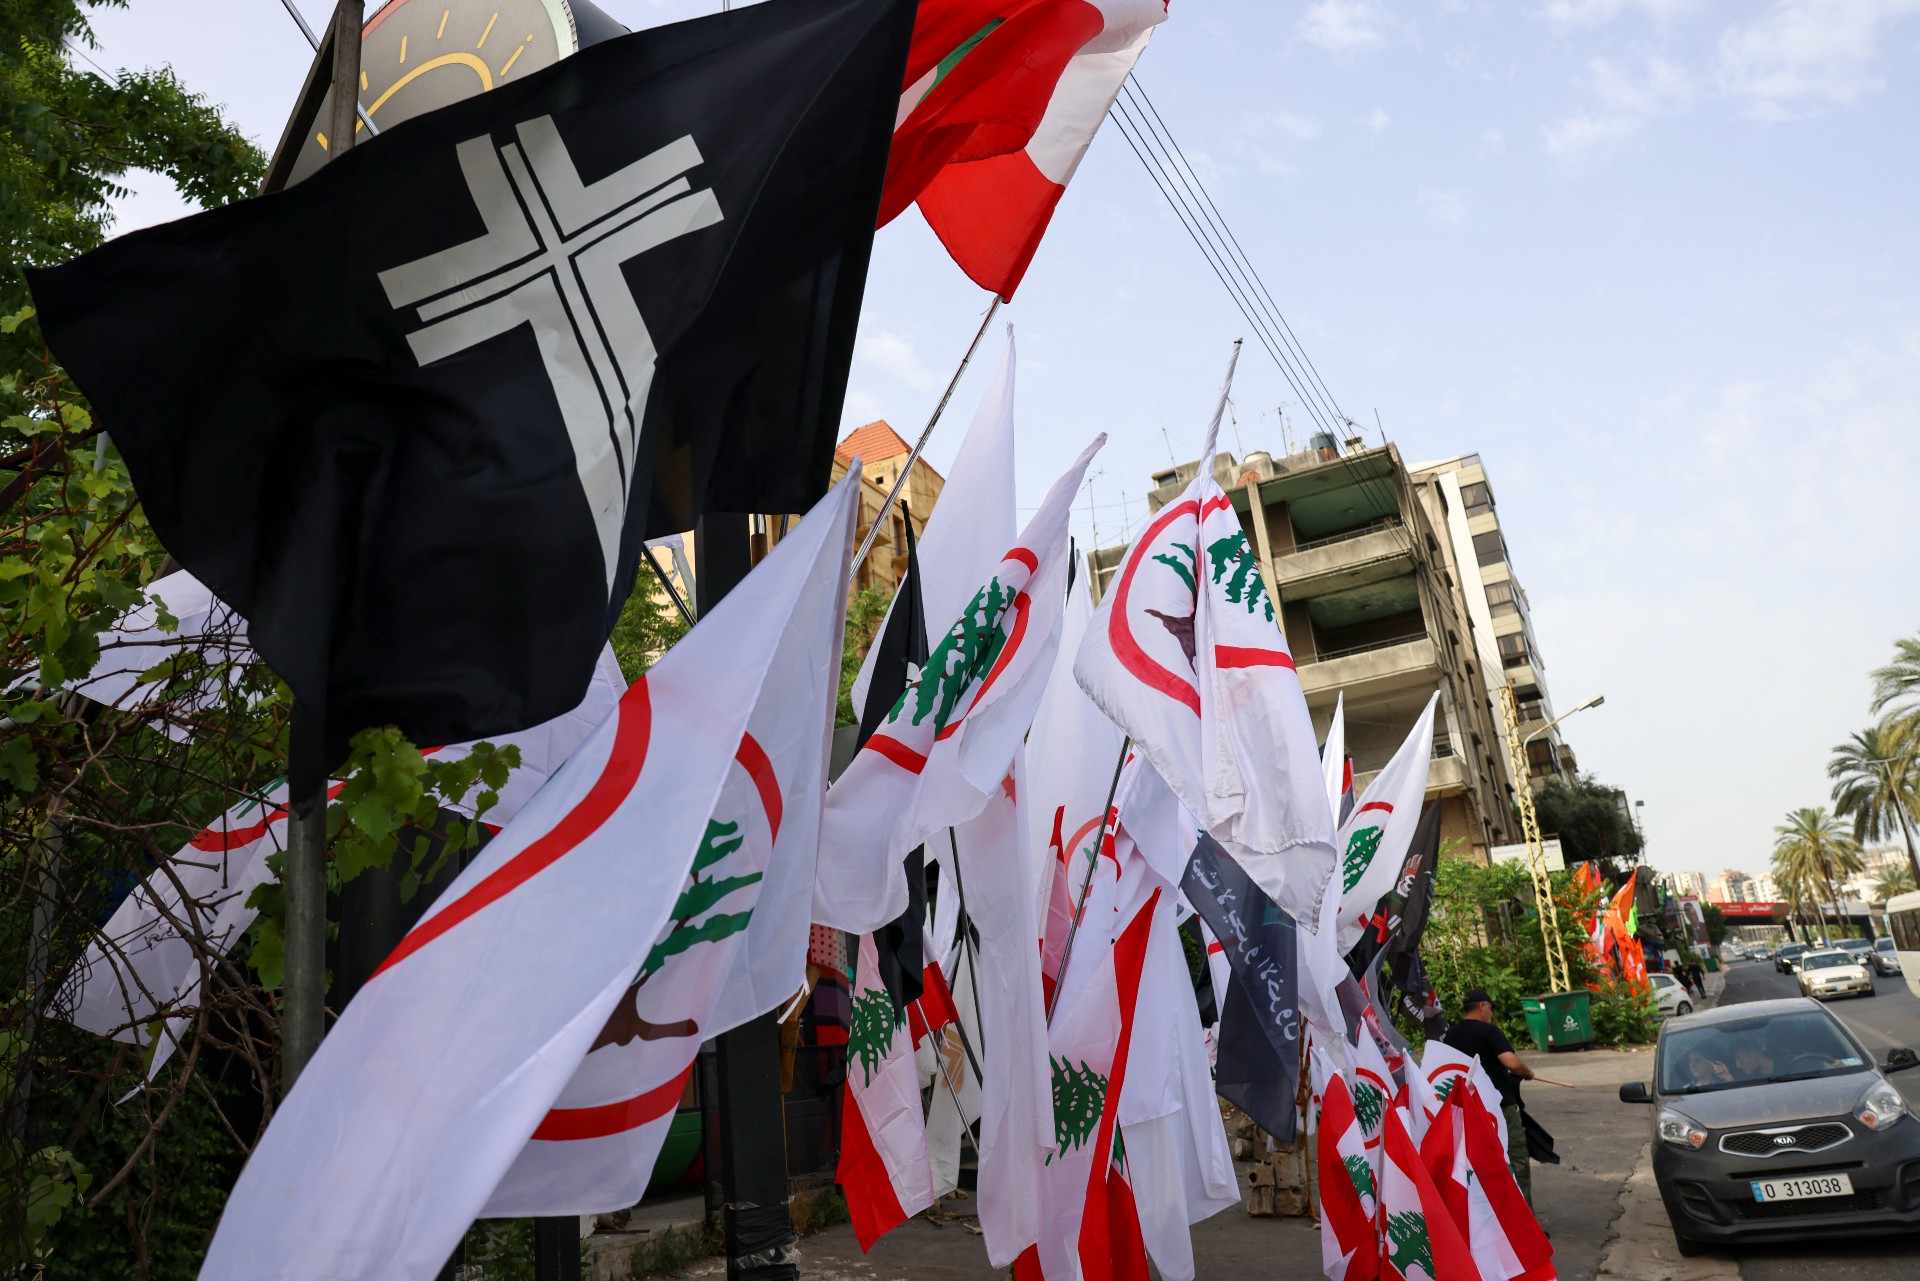 Flags of the Lebanese Forces political party sway in the wind outside a restaurant in the coastal city of Byblos (Jbeil) (AFP)